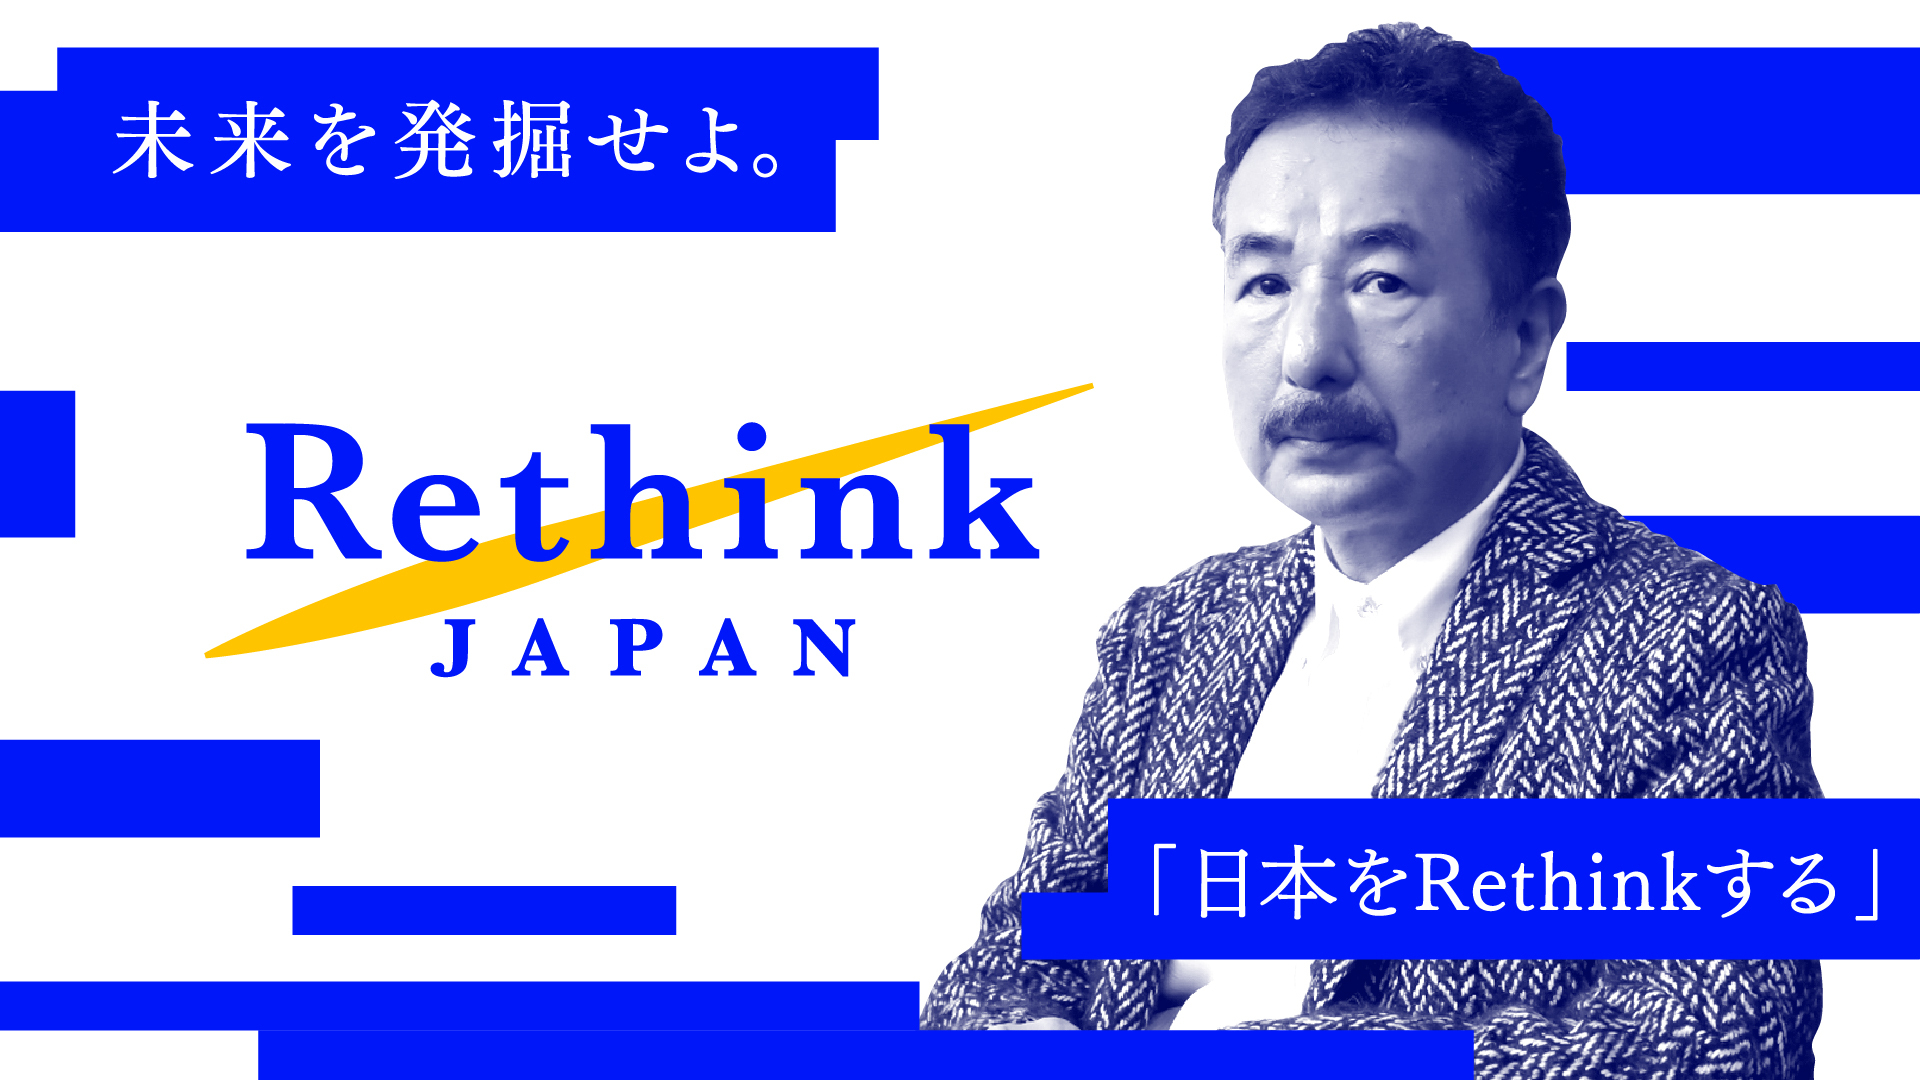 Rethink Japan by Rethink PROJECT